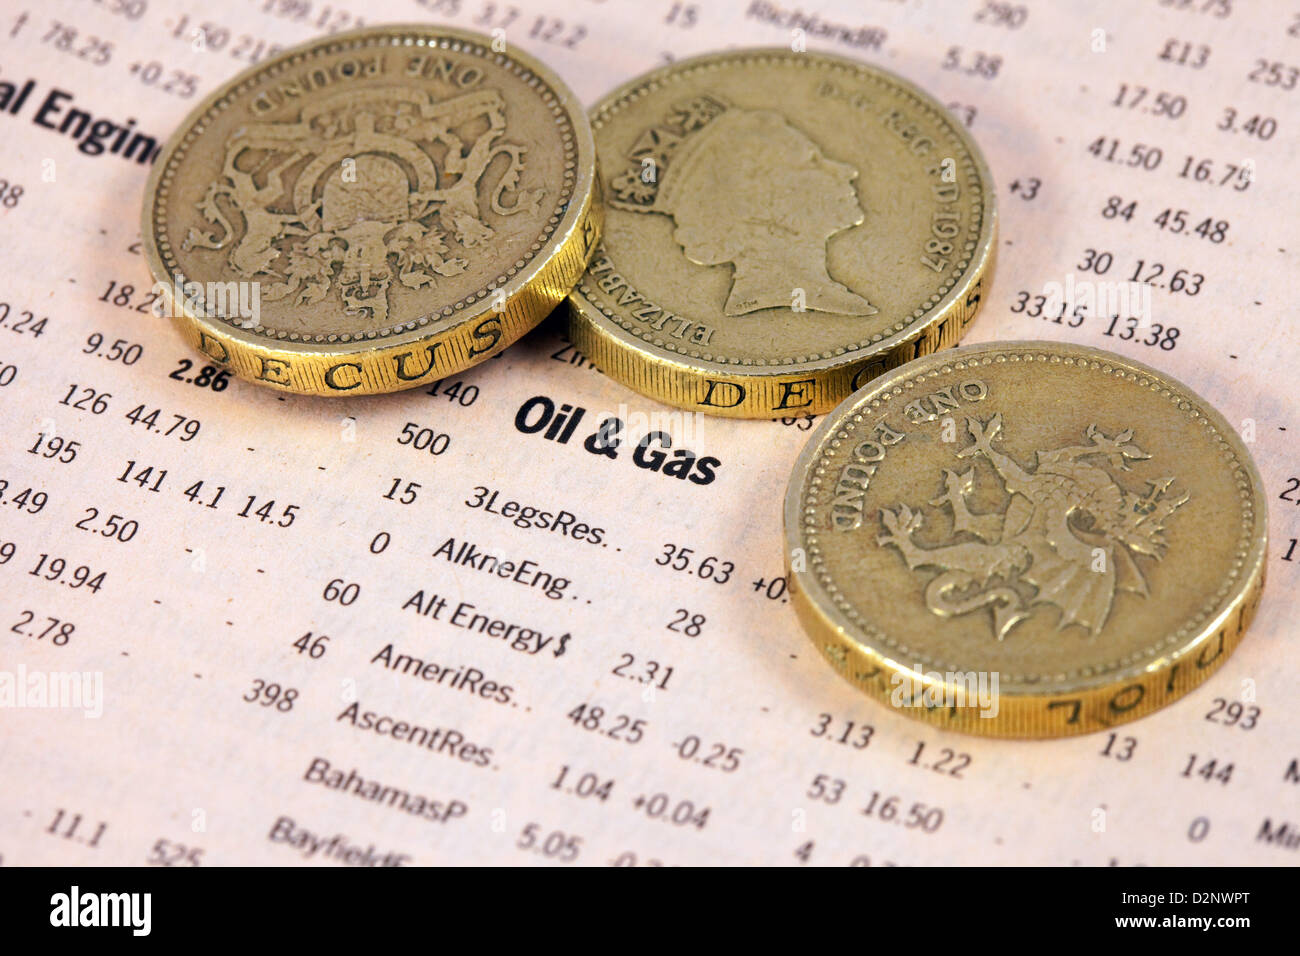 Oil and gas share values listed in the Financial Times  with pound coins - concept of oil money Stock Photo